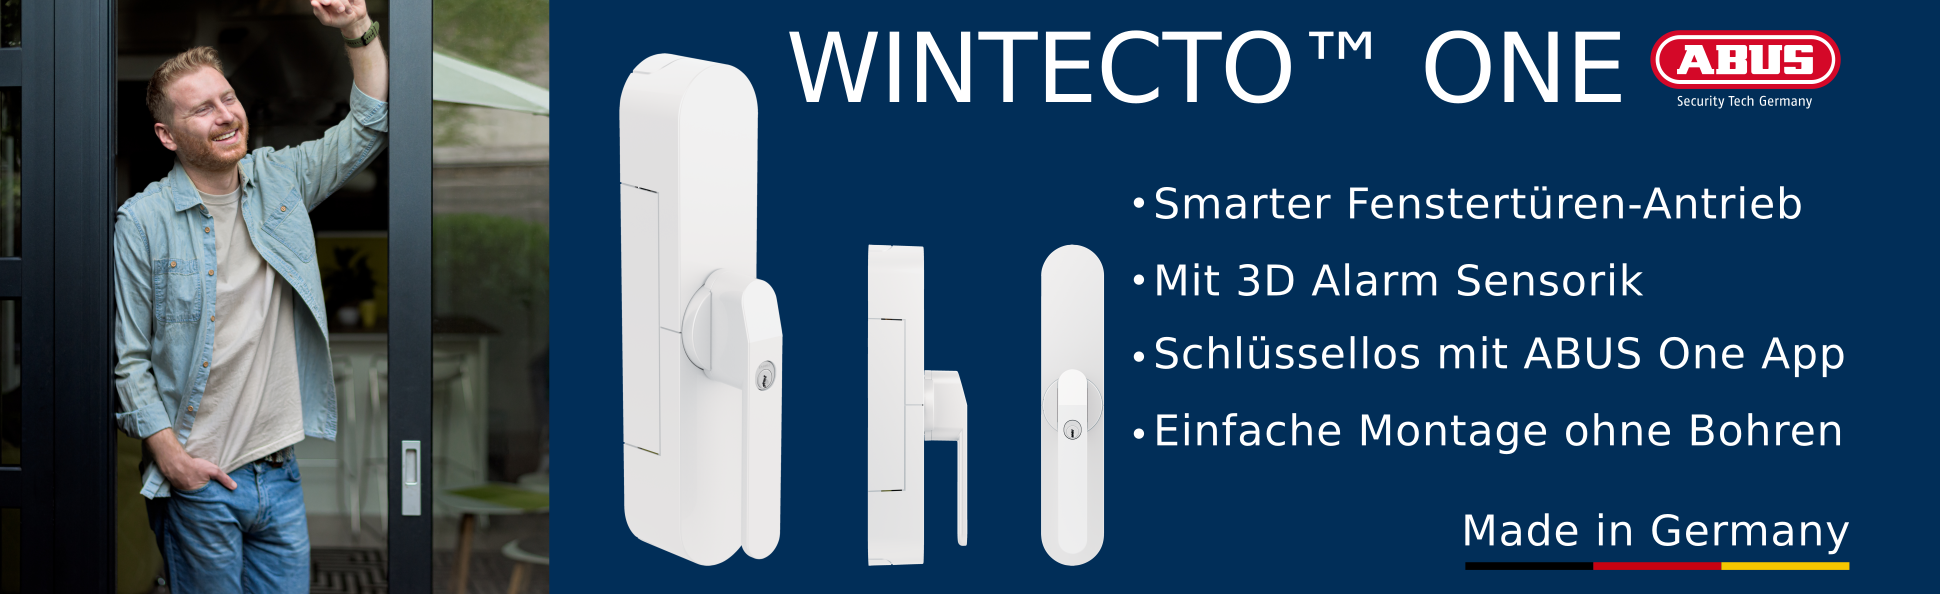 ABUS Wintecto one smarter fenstergriff 